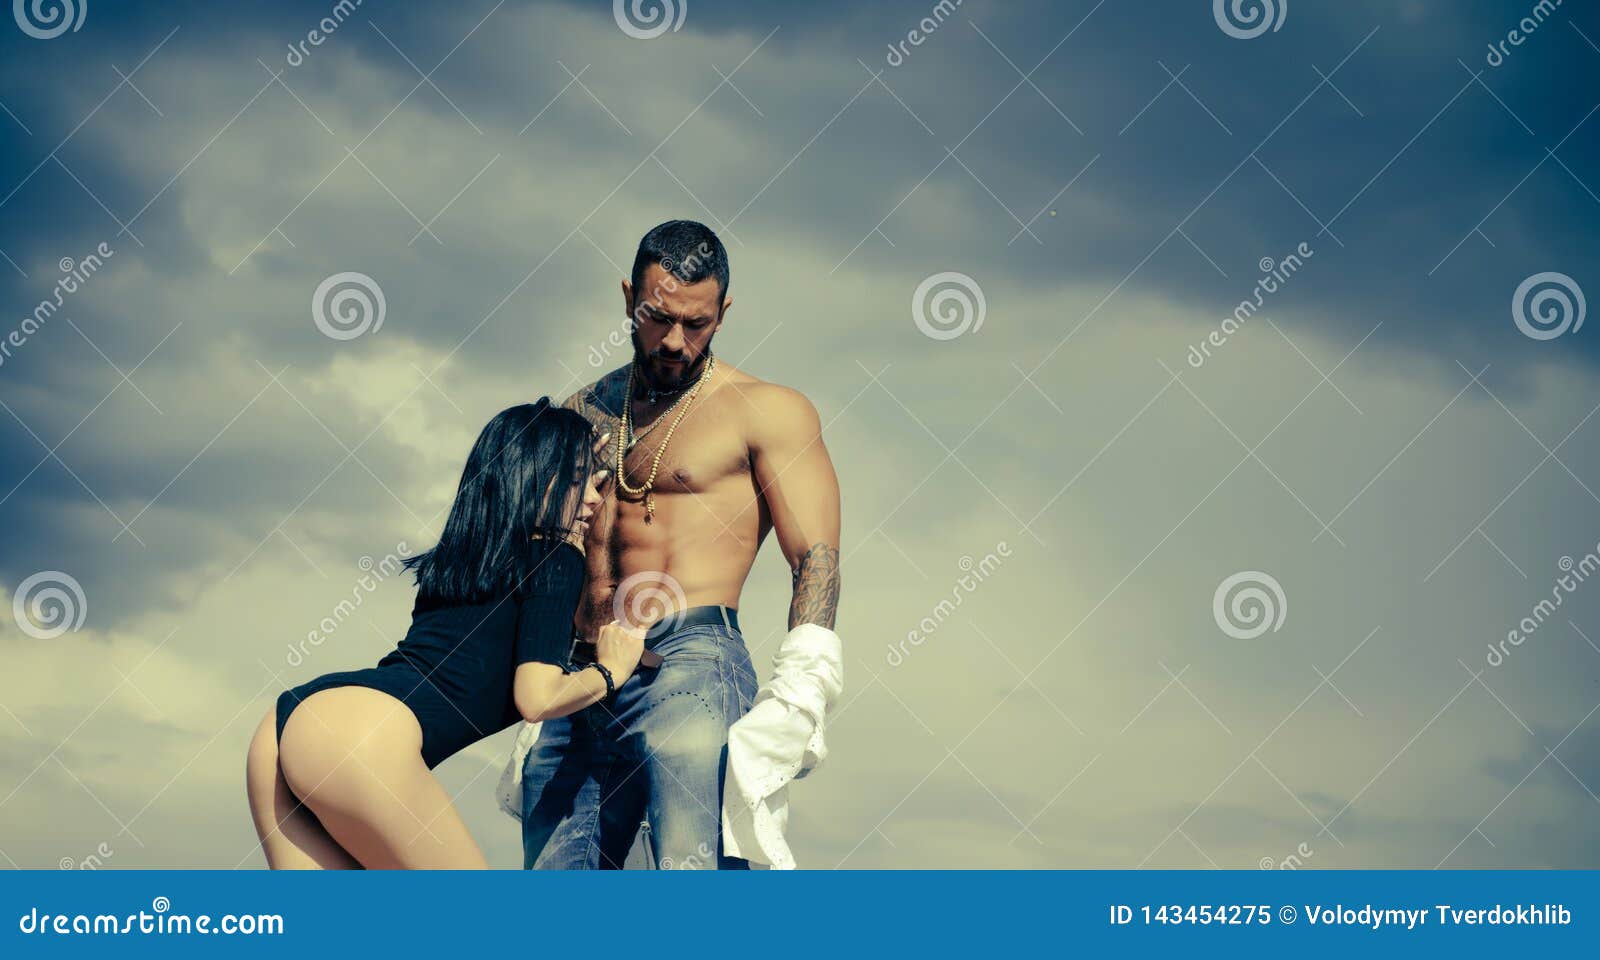 Couple in Love. Love and Flirt. Muscular Man and Fit Slim Young Female. Couple Goals photo